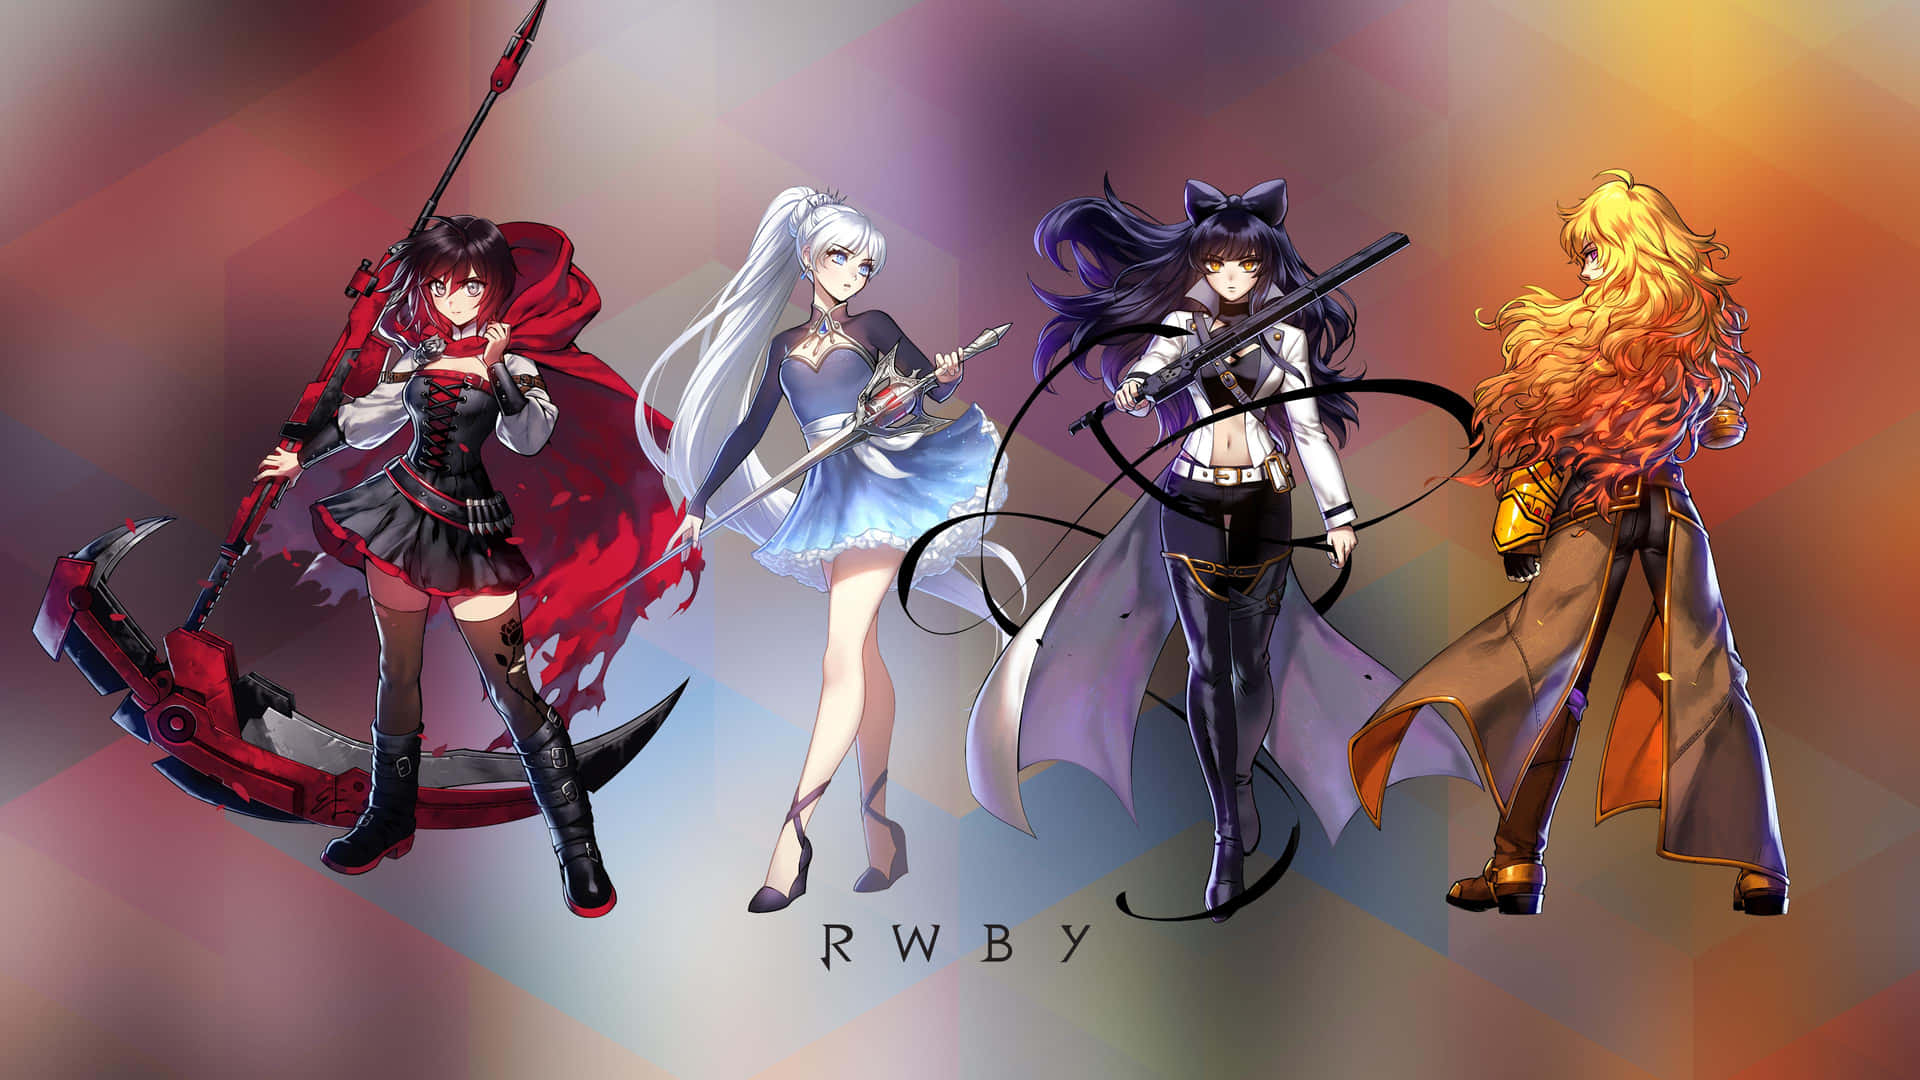 Determination&Strength: Get ready for an unforgettable journey with Team RWBY!